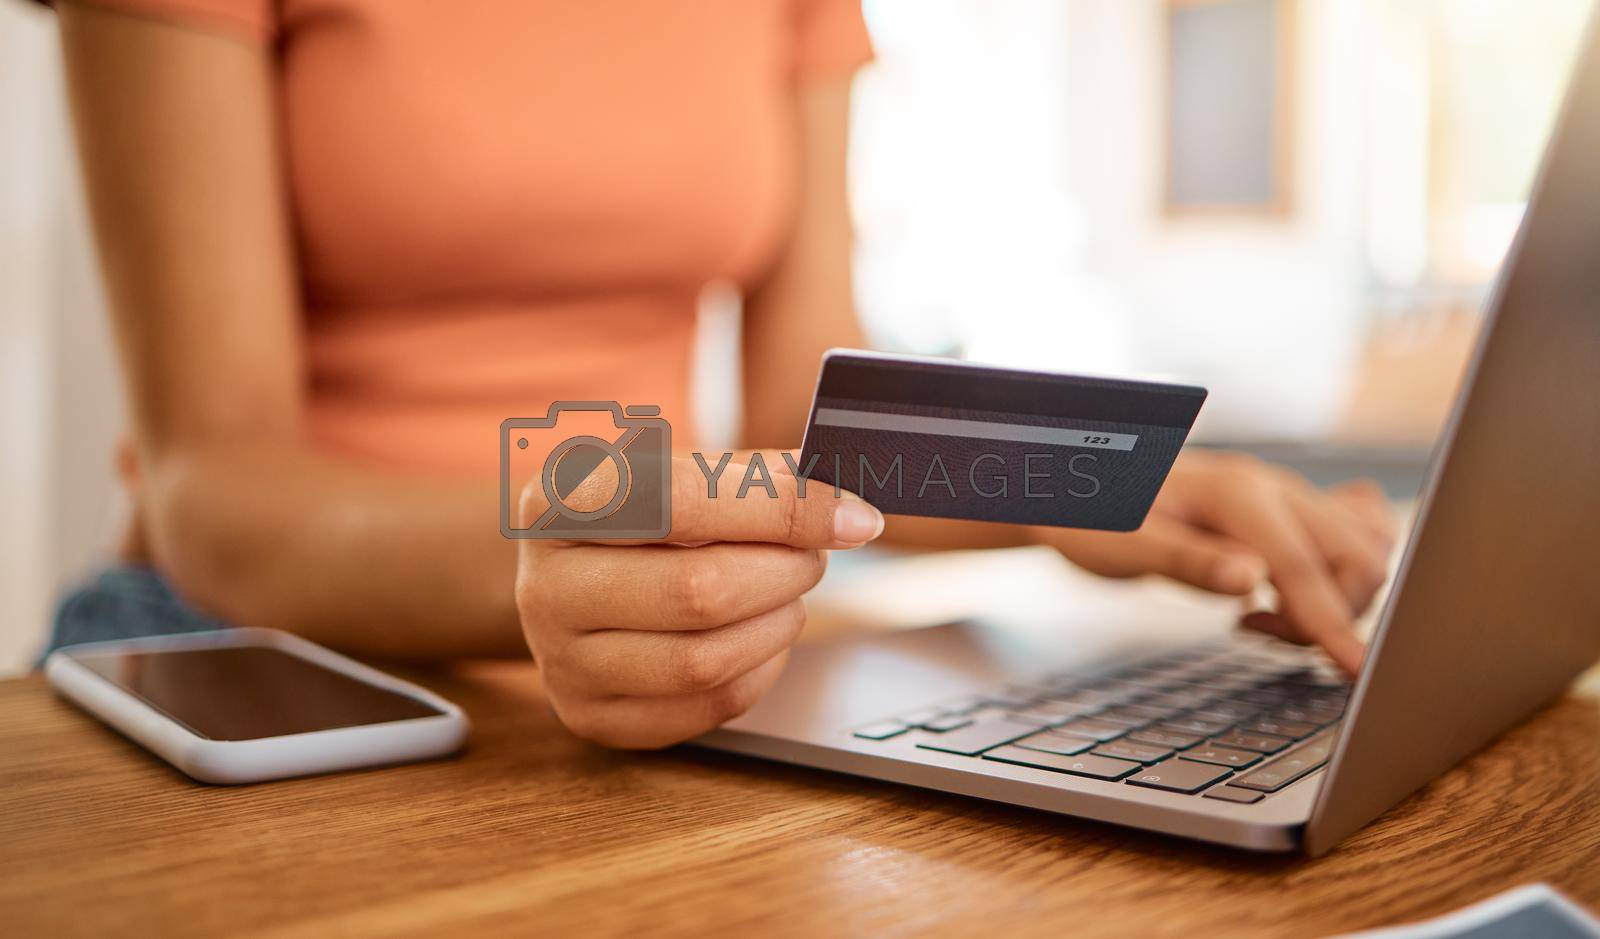 Royalty free image of Businesswoman using a credit card and laptop while working from home. Business professional making an online payment holding a debit card and working on a laptop at home by YuriArcurs